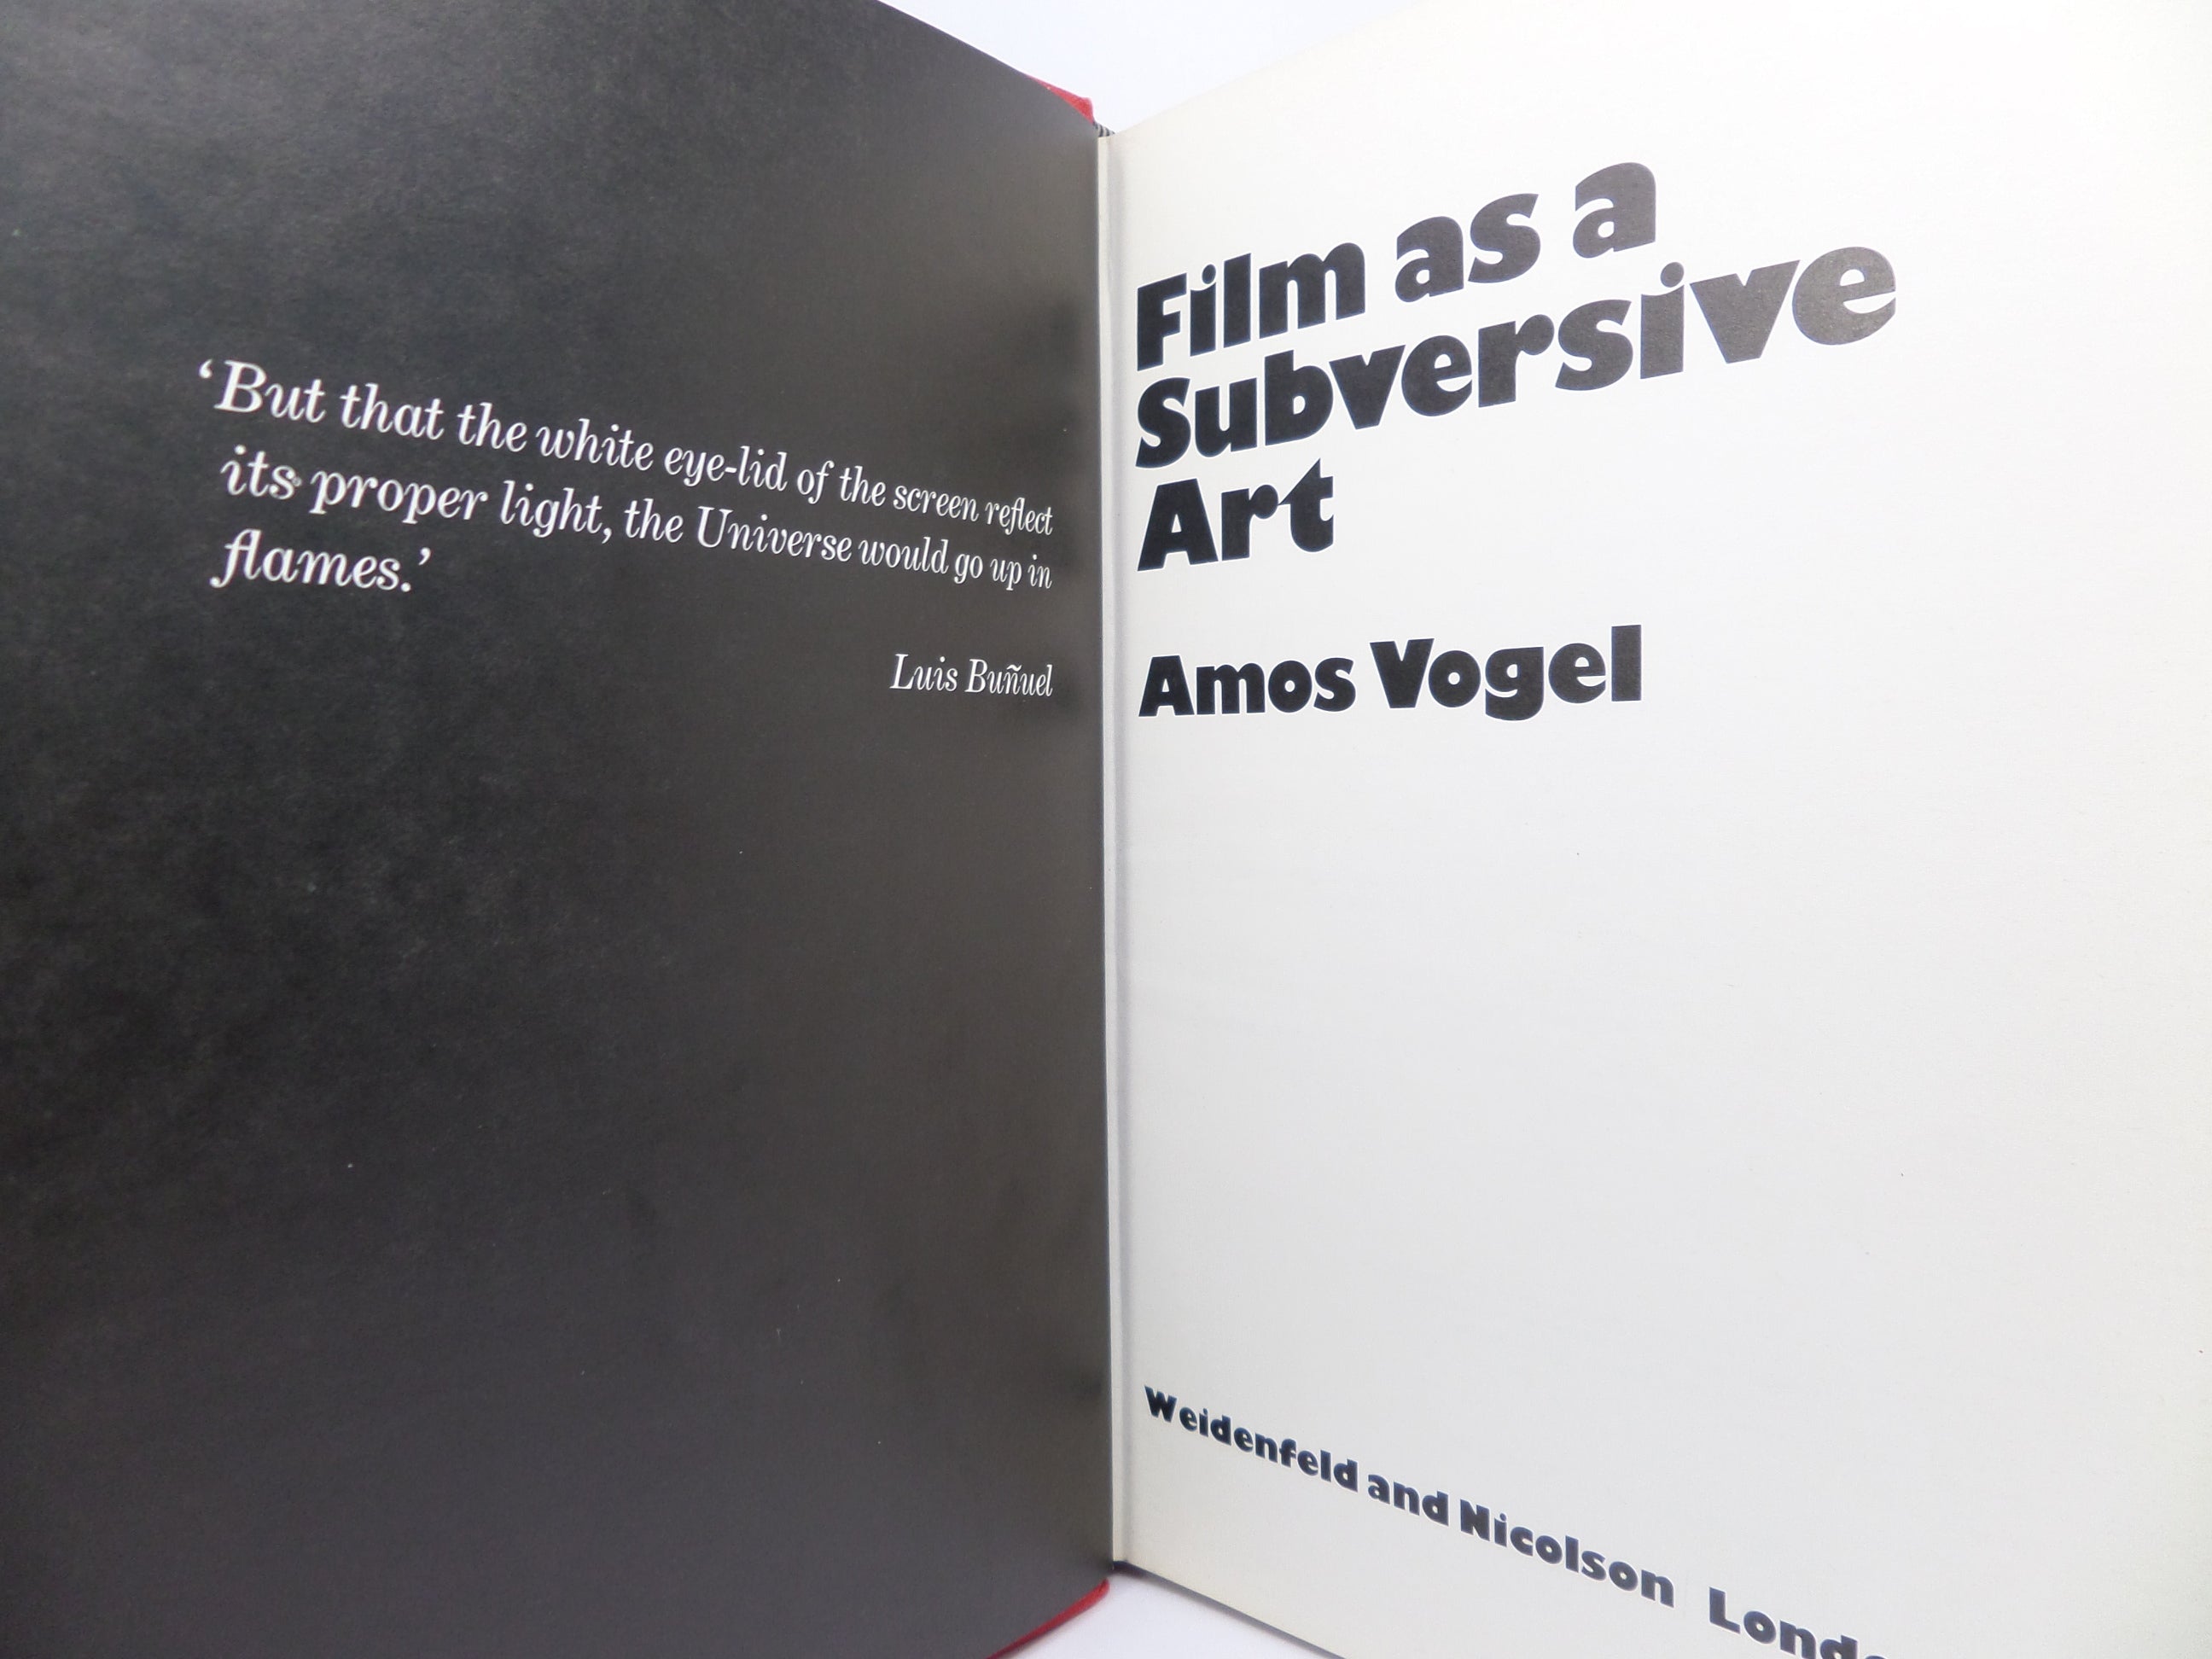 FILM AS A SUBVERSIVE ART BY AMOS VOGEL 1974 FIRST EDITION HARDCOVER